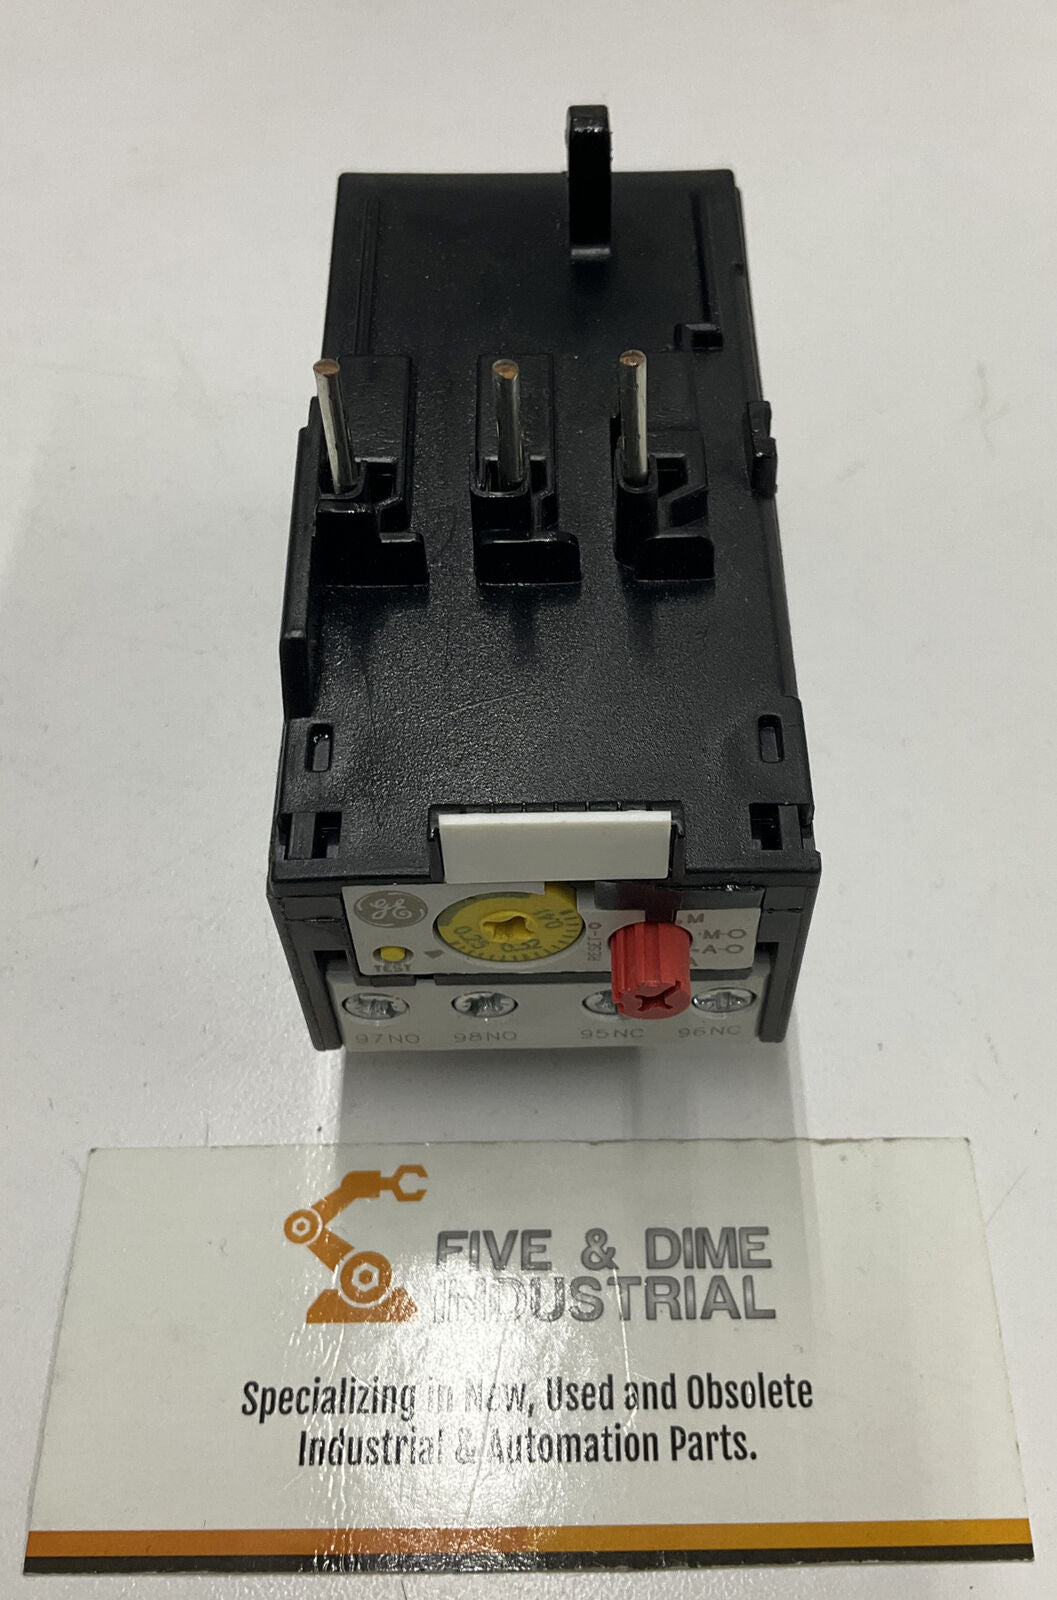 GE RT1C New Overload Relay 0.25-0.41A 113701 (YE166)